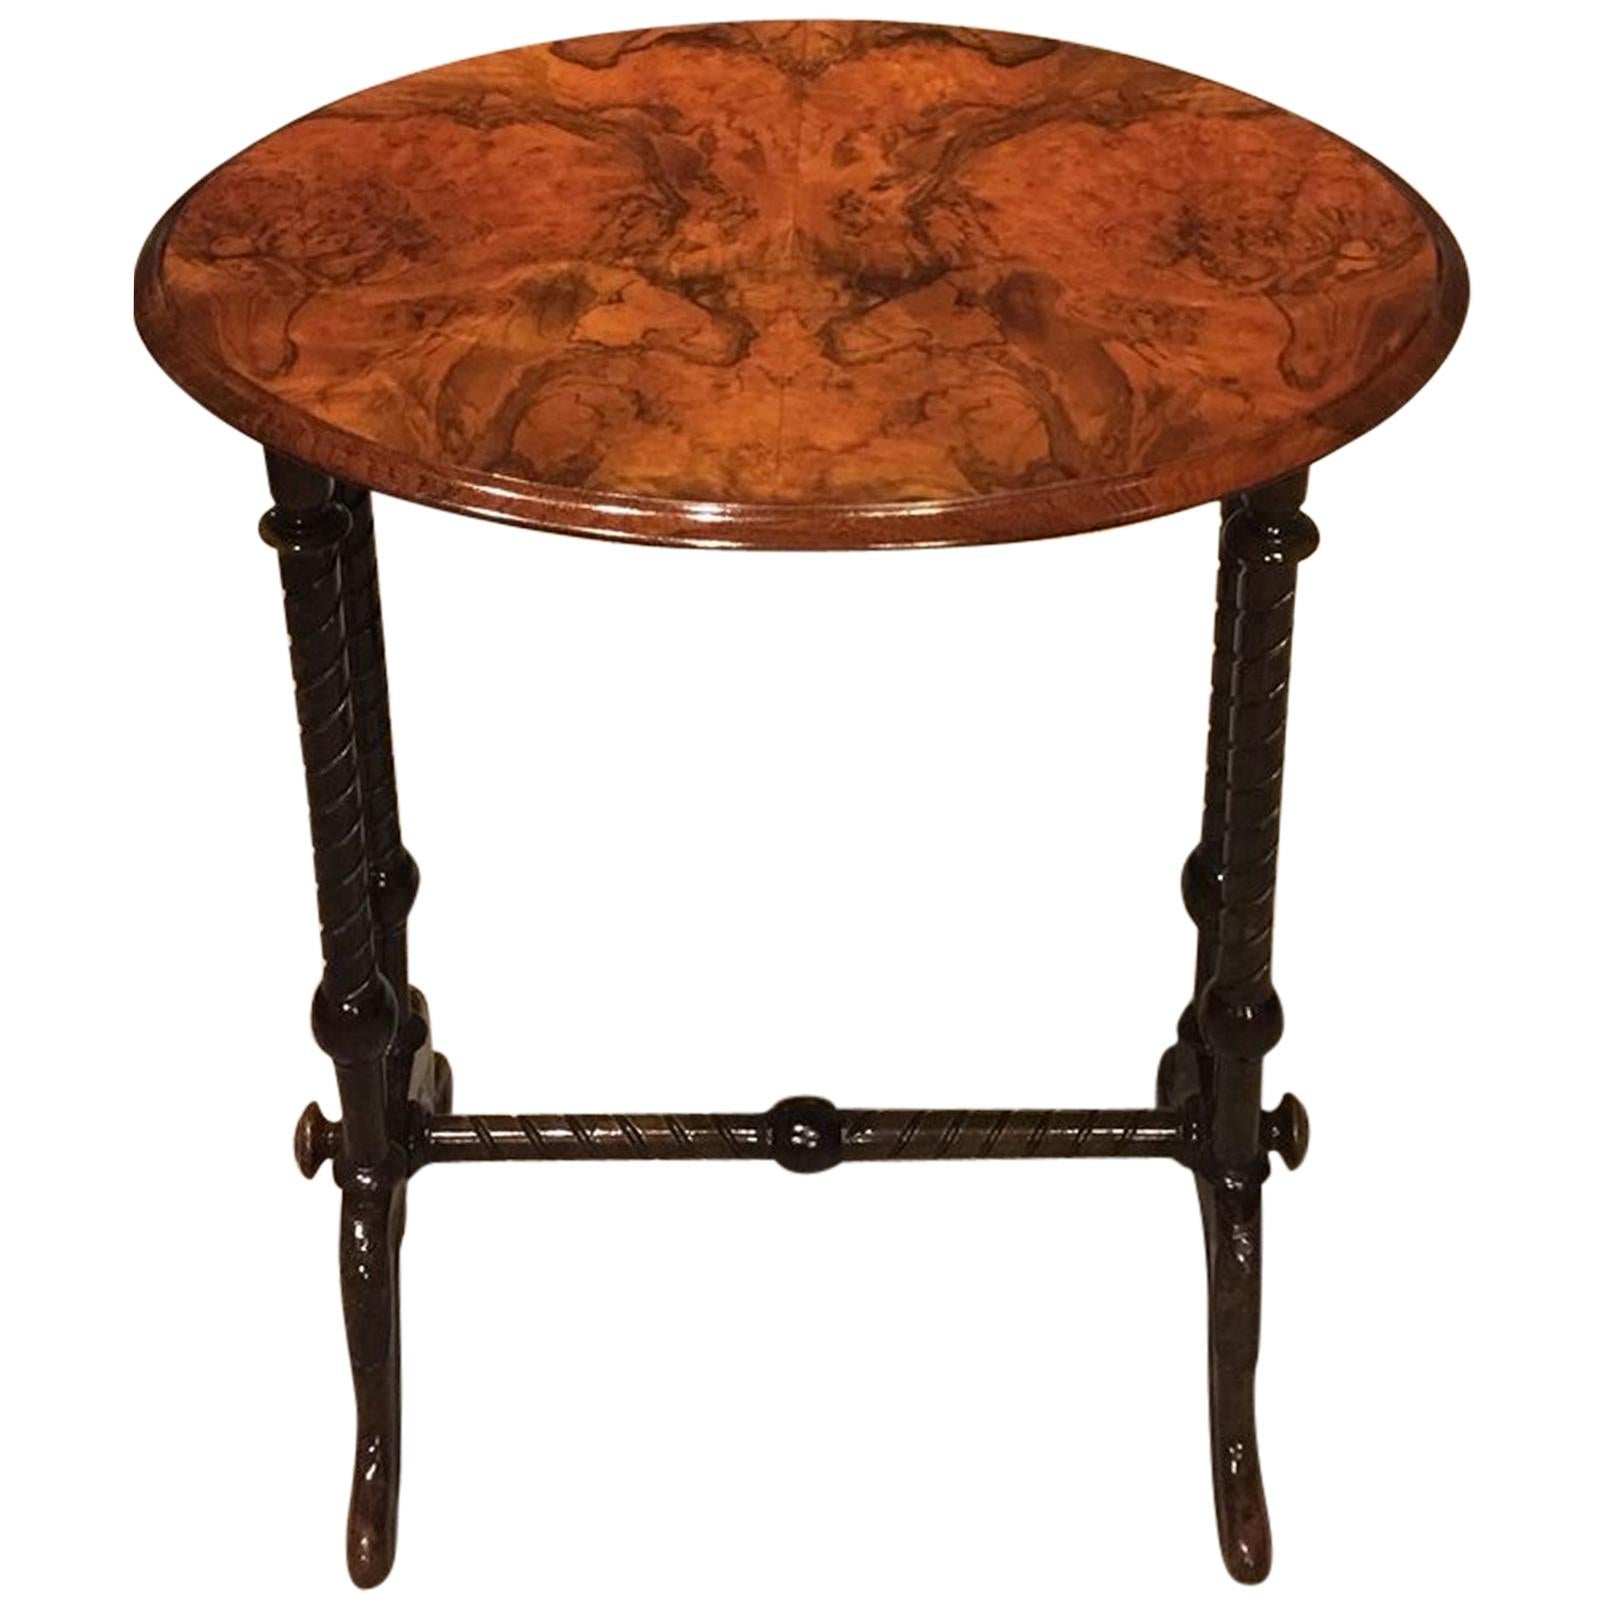 Burr Walnut Victorian Period Oval Occasional Table